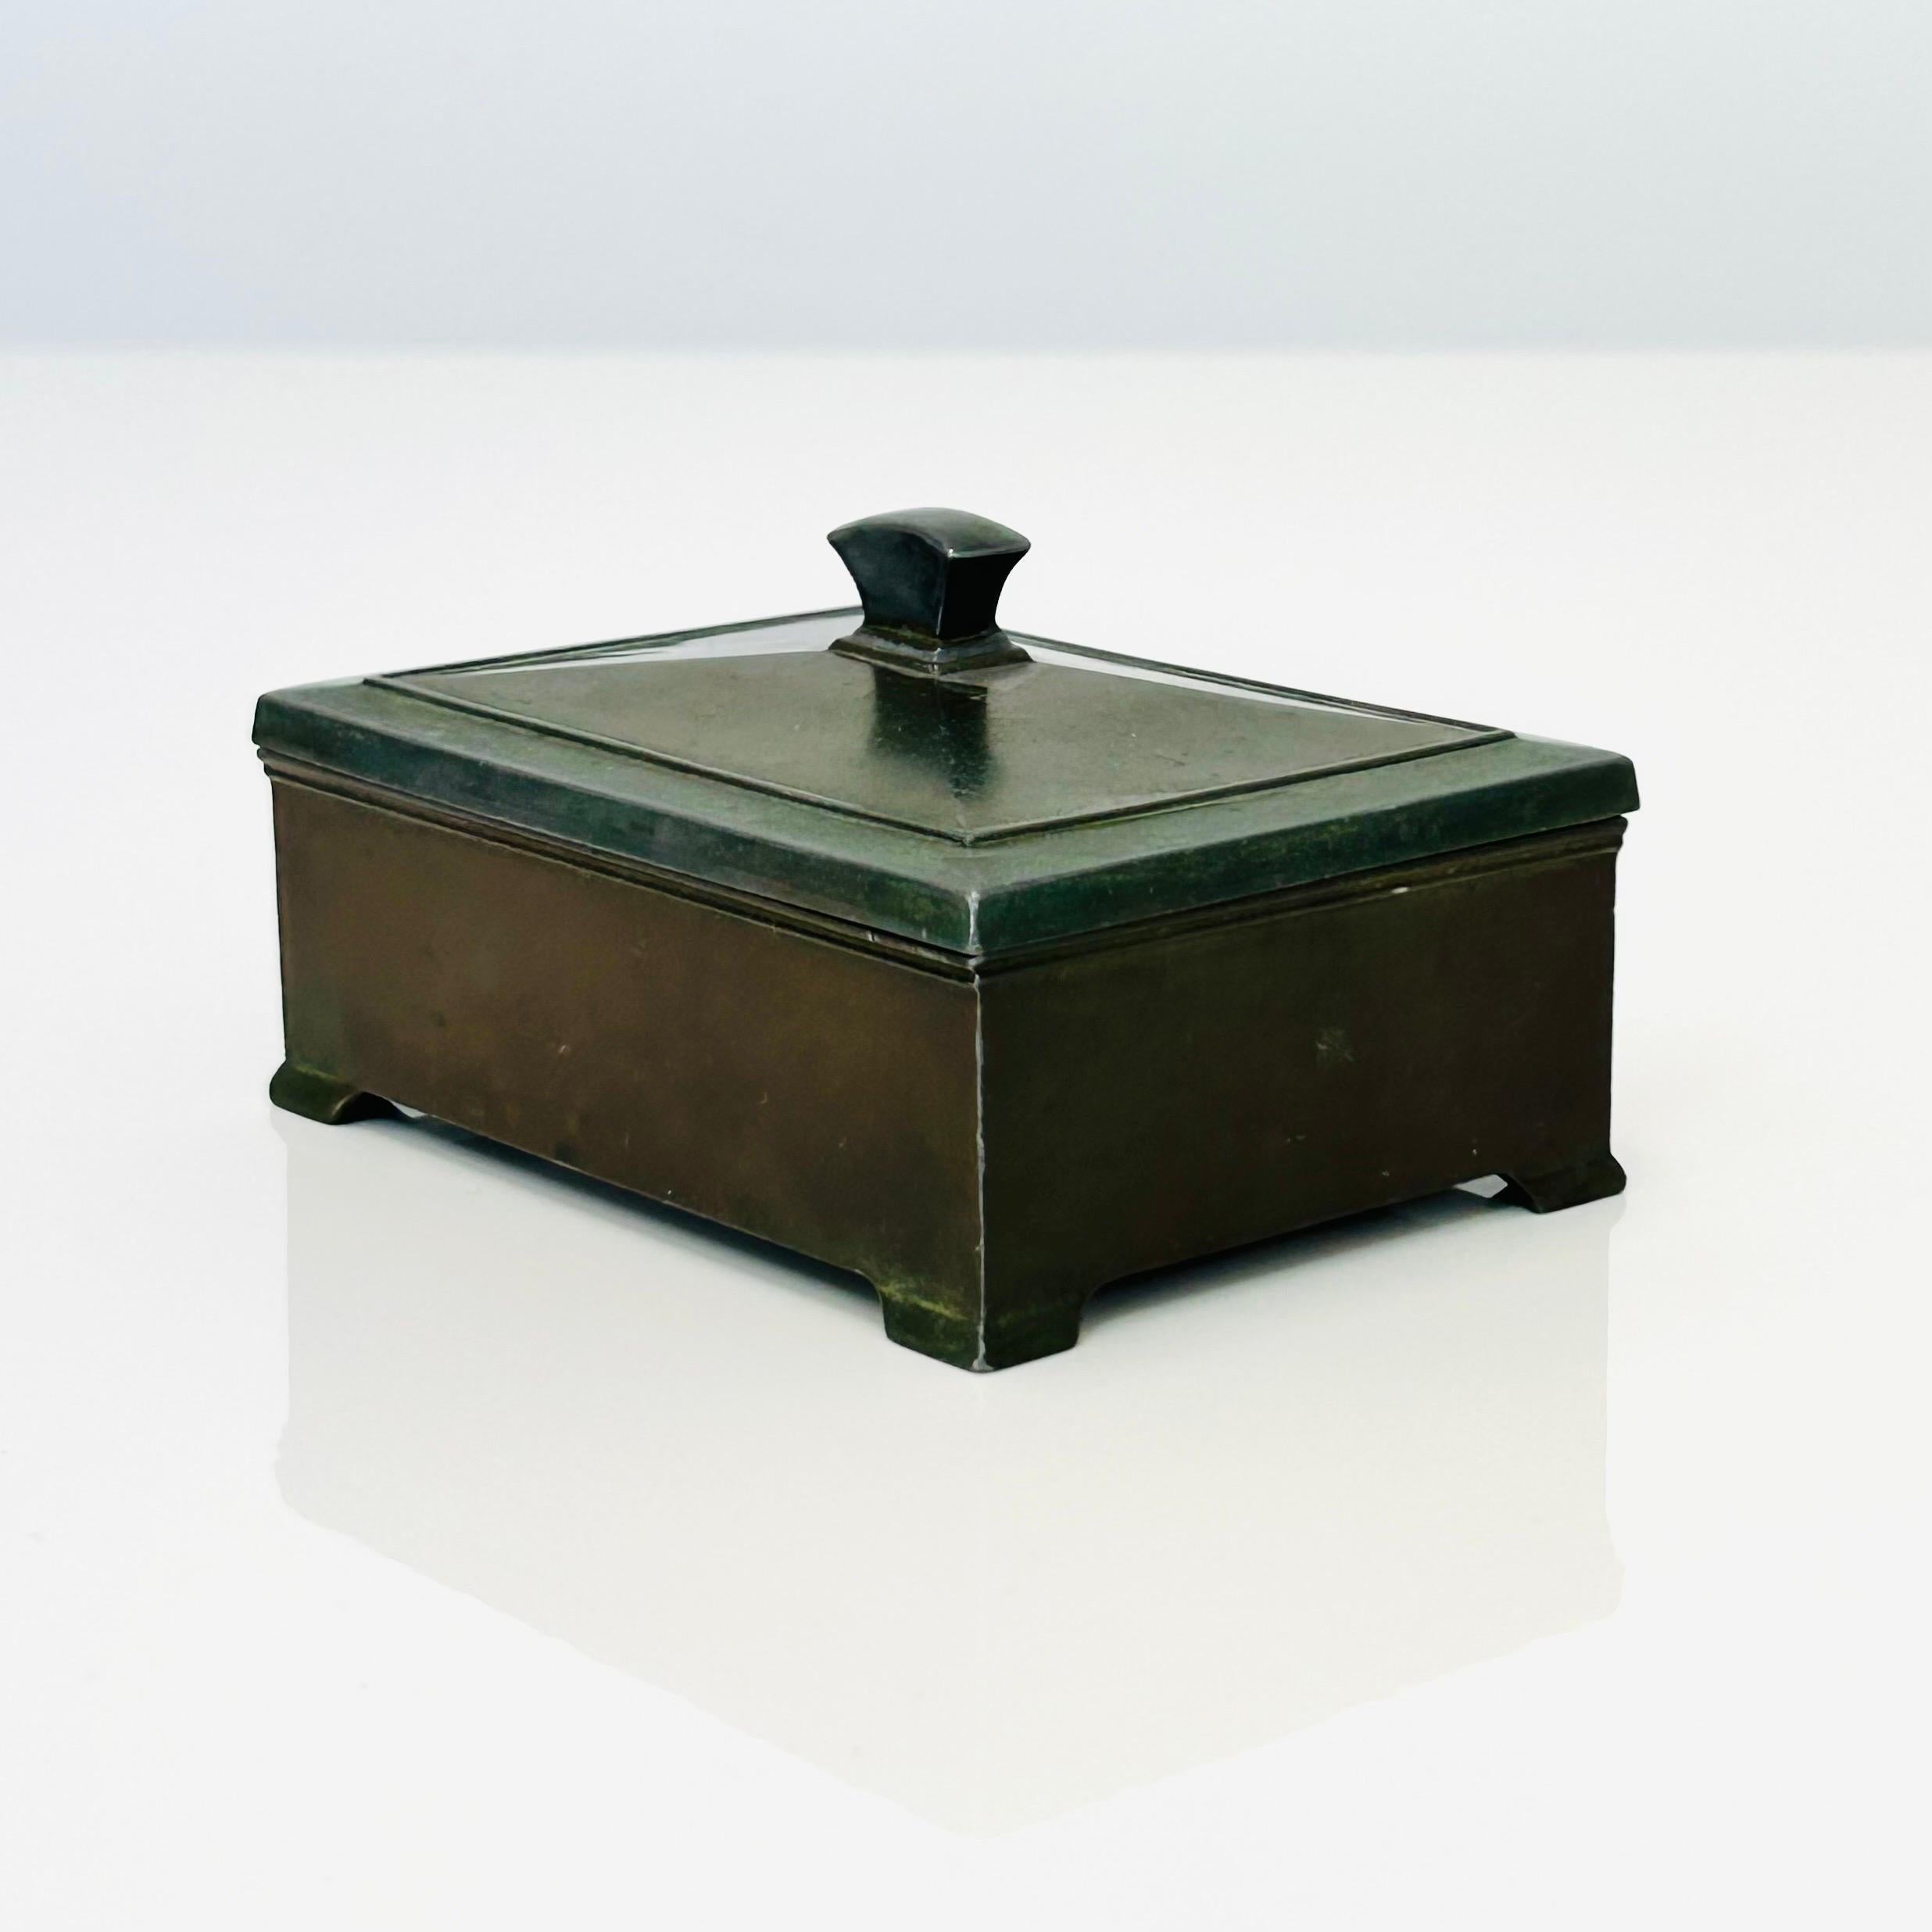 A lidded metal casket / jewellery box designed by and produced by Just Andersen in the 1930s. It is made of 'Diskometal' - an alloy invented by Just Andersen - with an inside box in wood. It is in good vintage condition with small marks at the